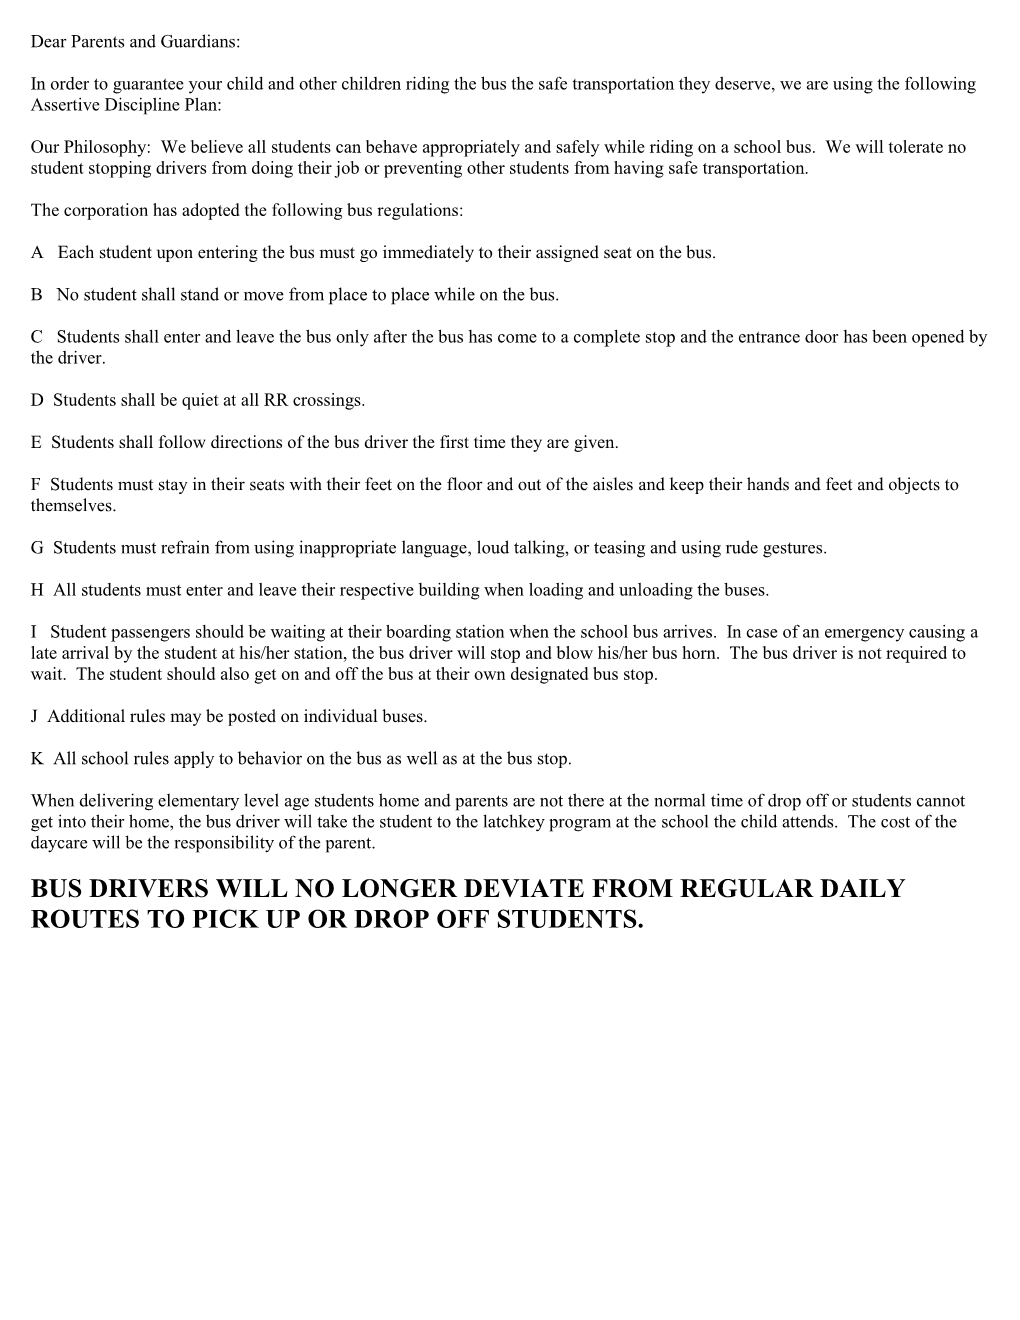 School Bus Rules and Regulations